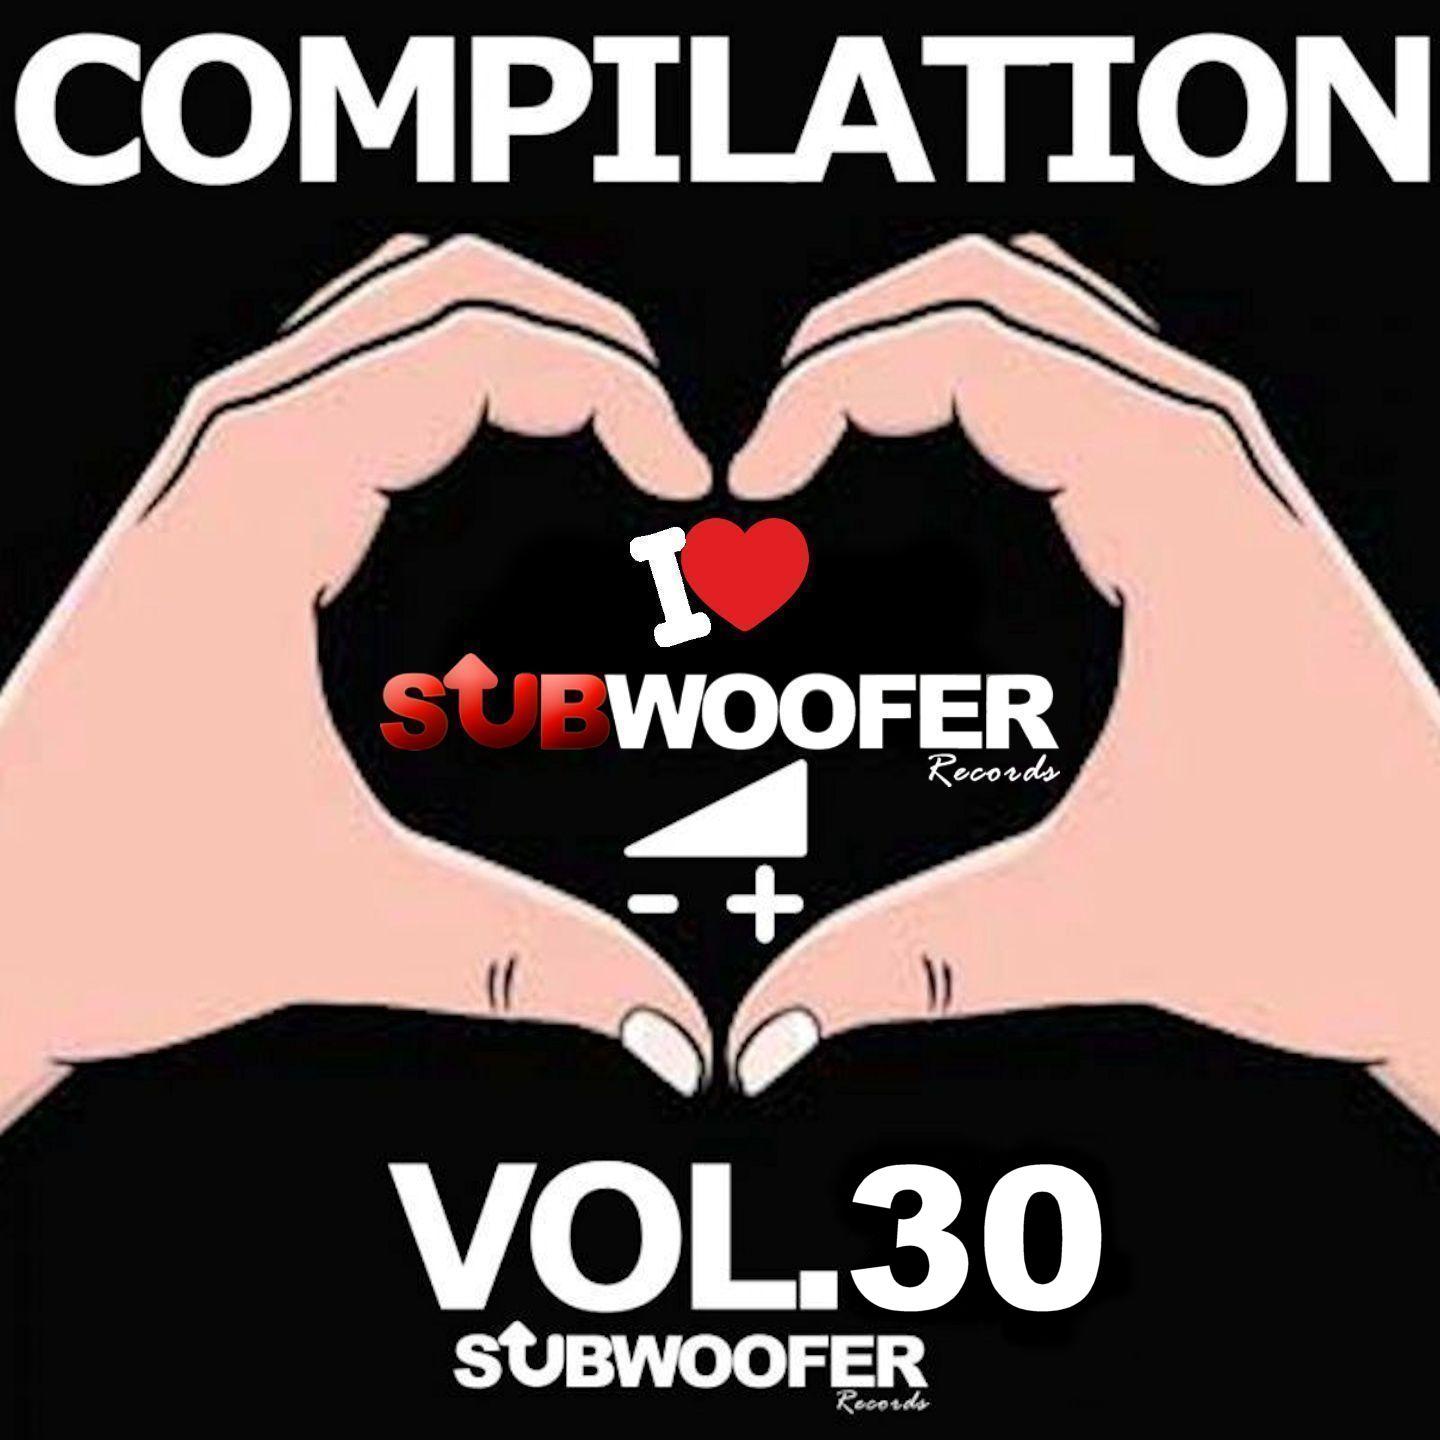 I Love Subwoofer Records Techno Compilation, Vol. 30 (Greatest Hits)